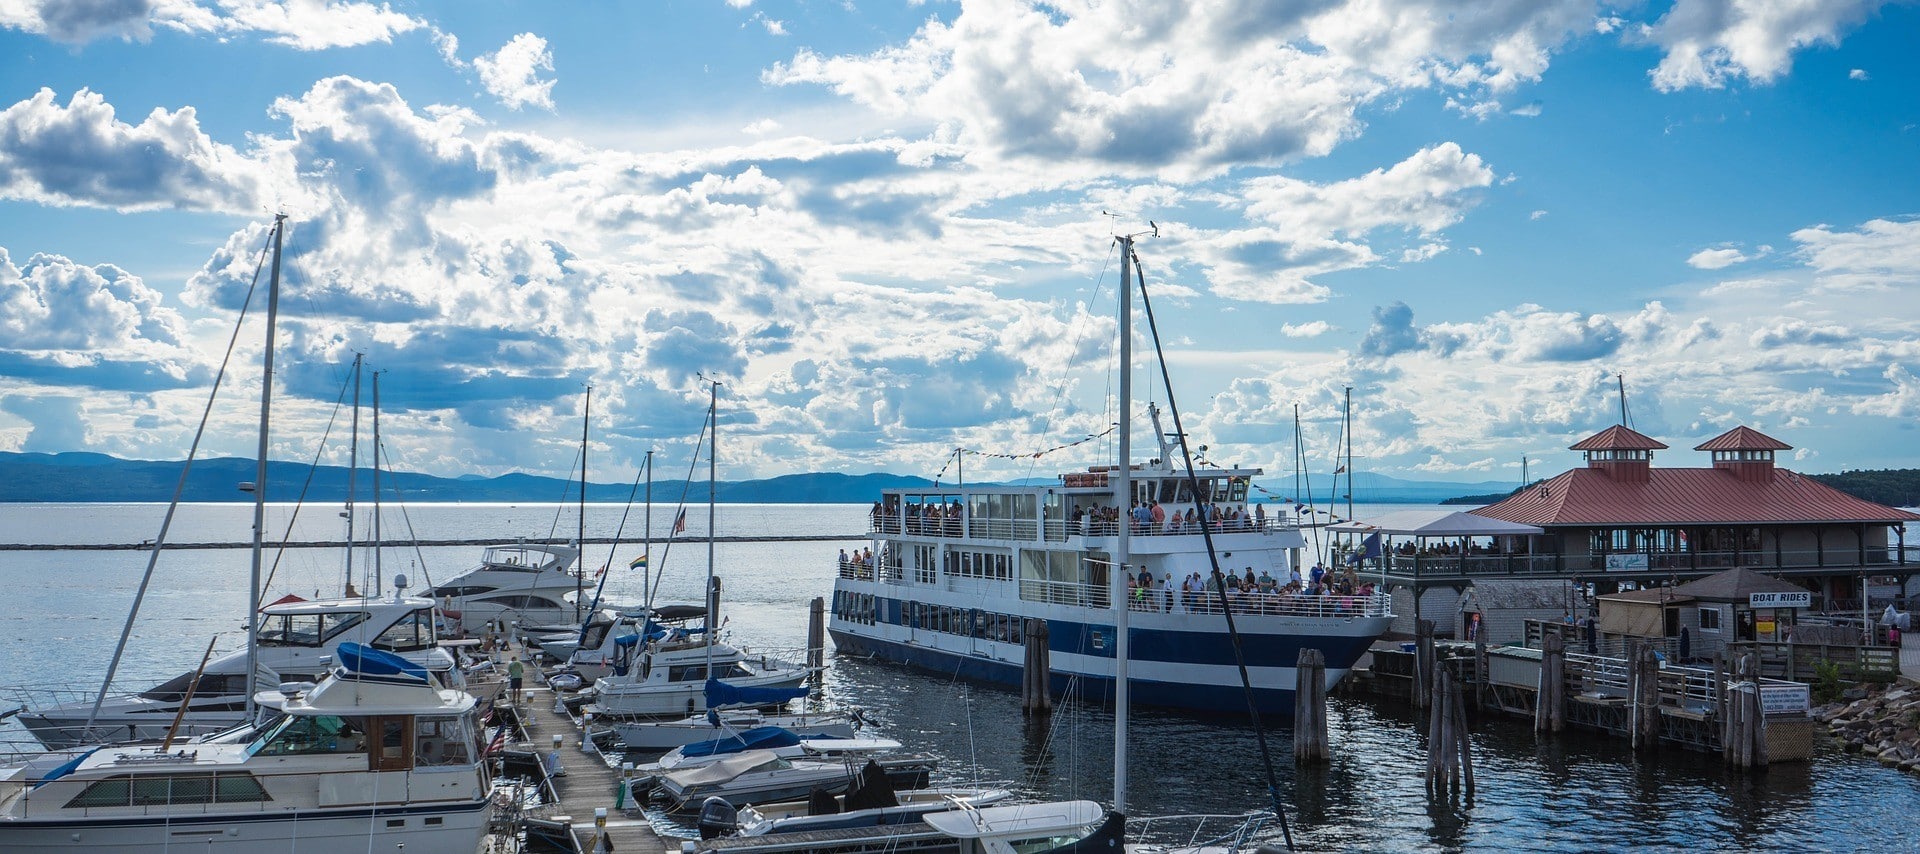 Heading to Vermont? Here is the ultimate 3-day Lake Champlain itinerary for the best places to see, activities to do, and where to explore in and around Lake Champlain. 